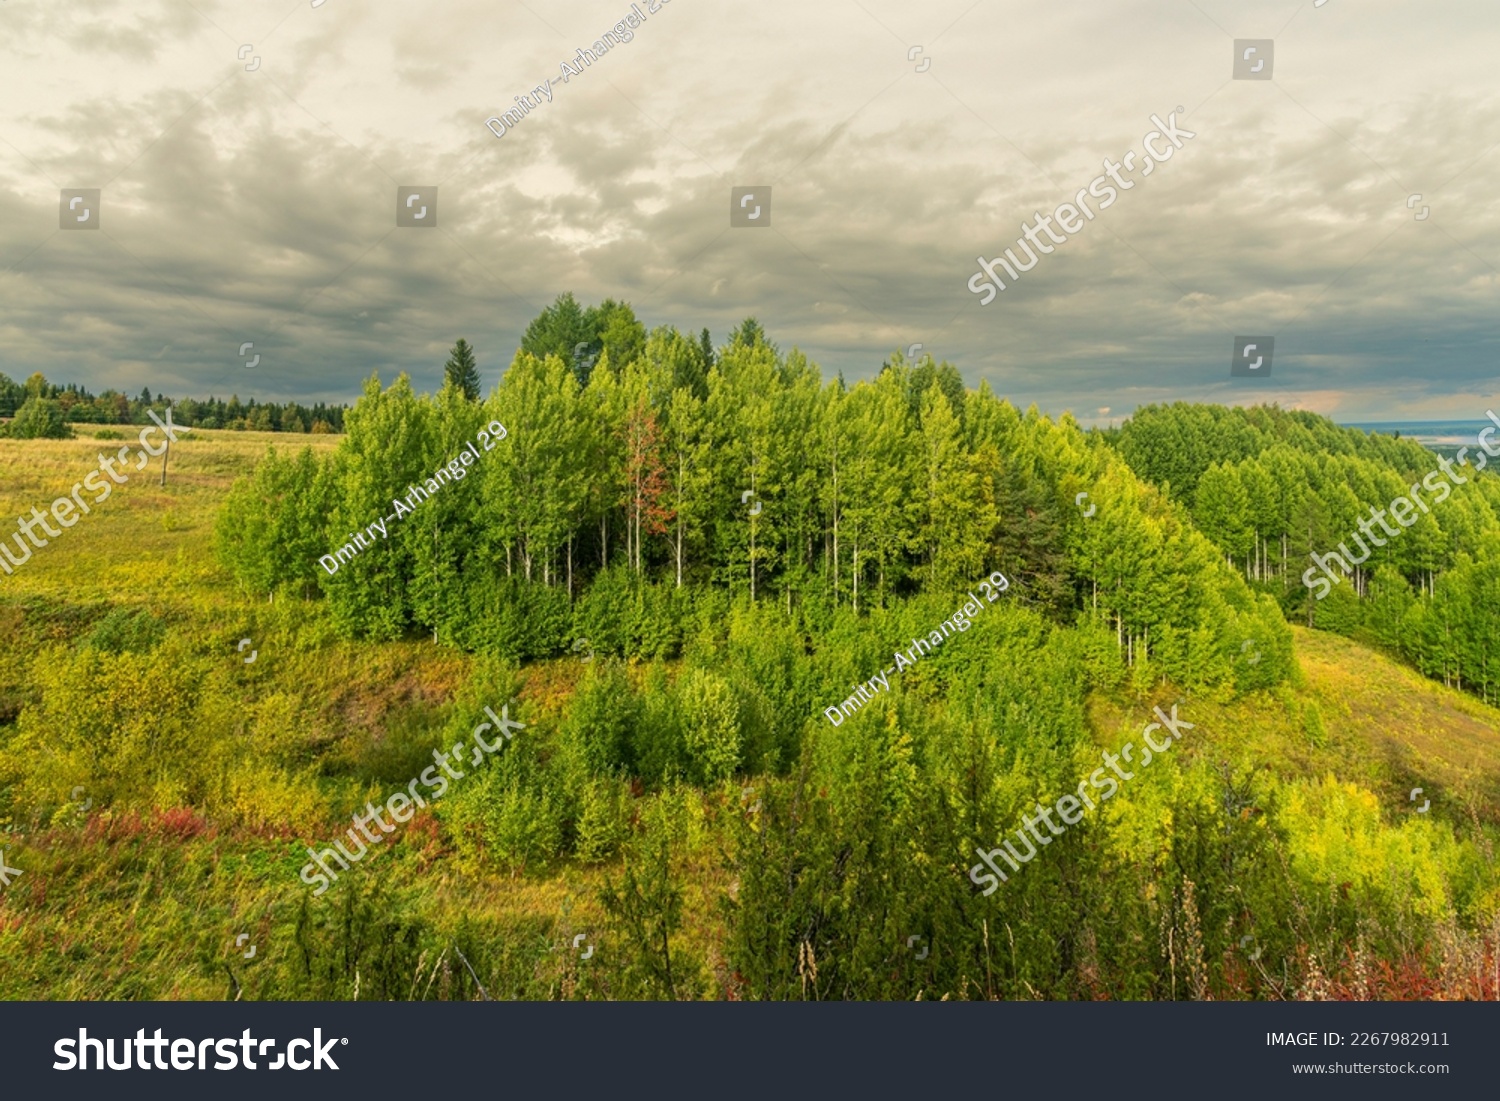 a small forest on top of a hill against a cloudy sky, Pinezhsky district Krasnaya Gorka Arkhangelsk region. travel and tourism. #2267982911